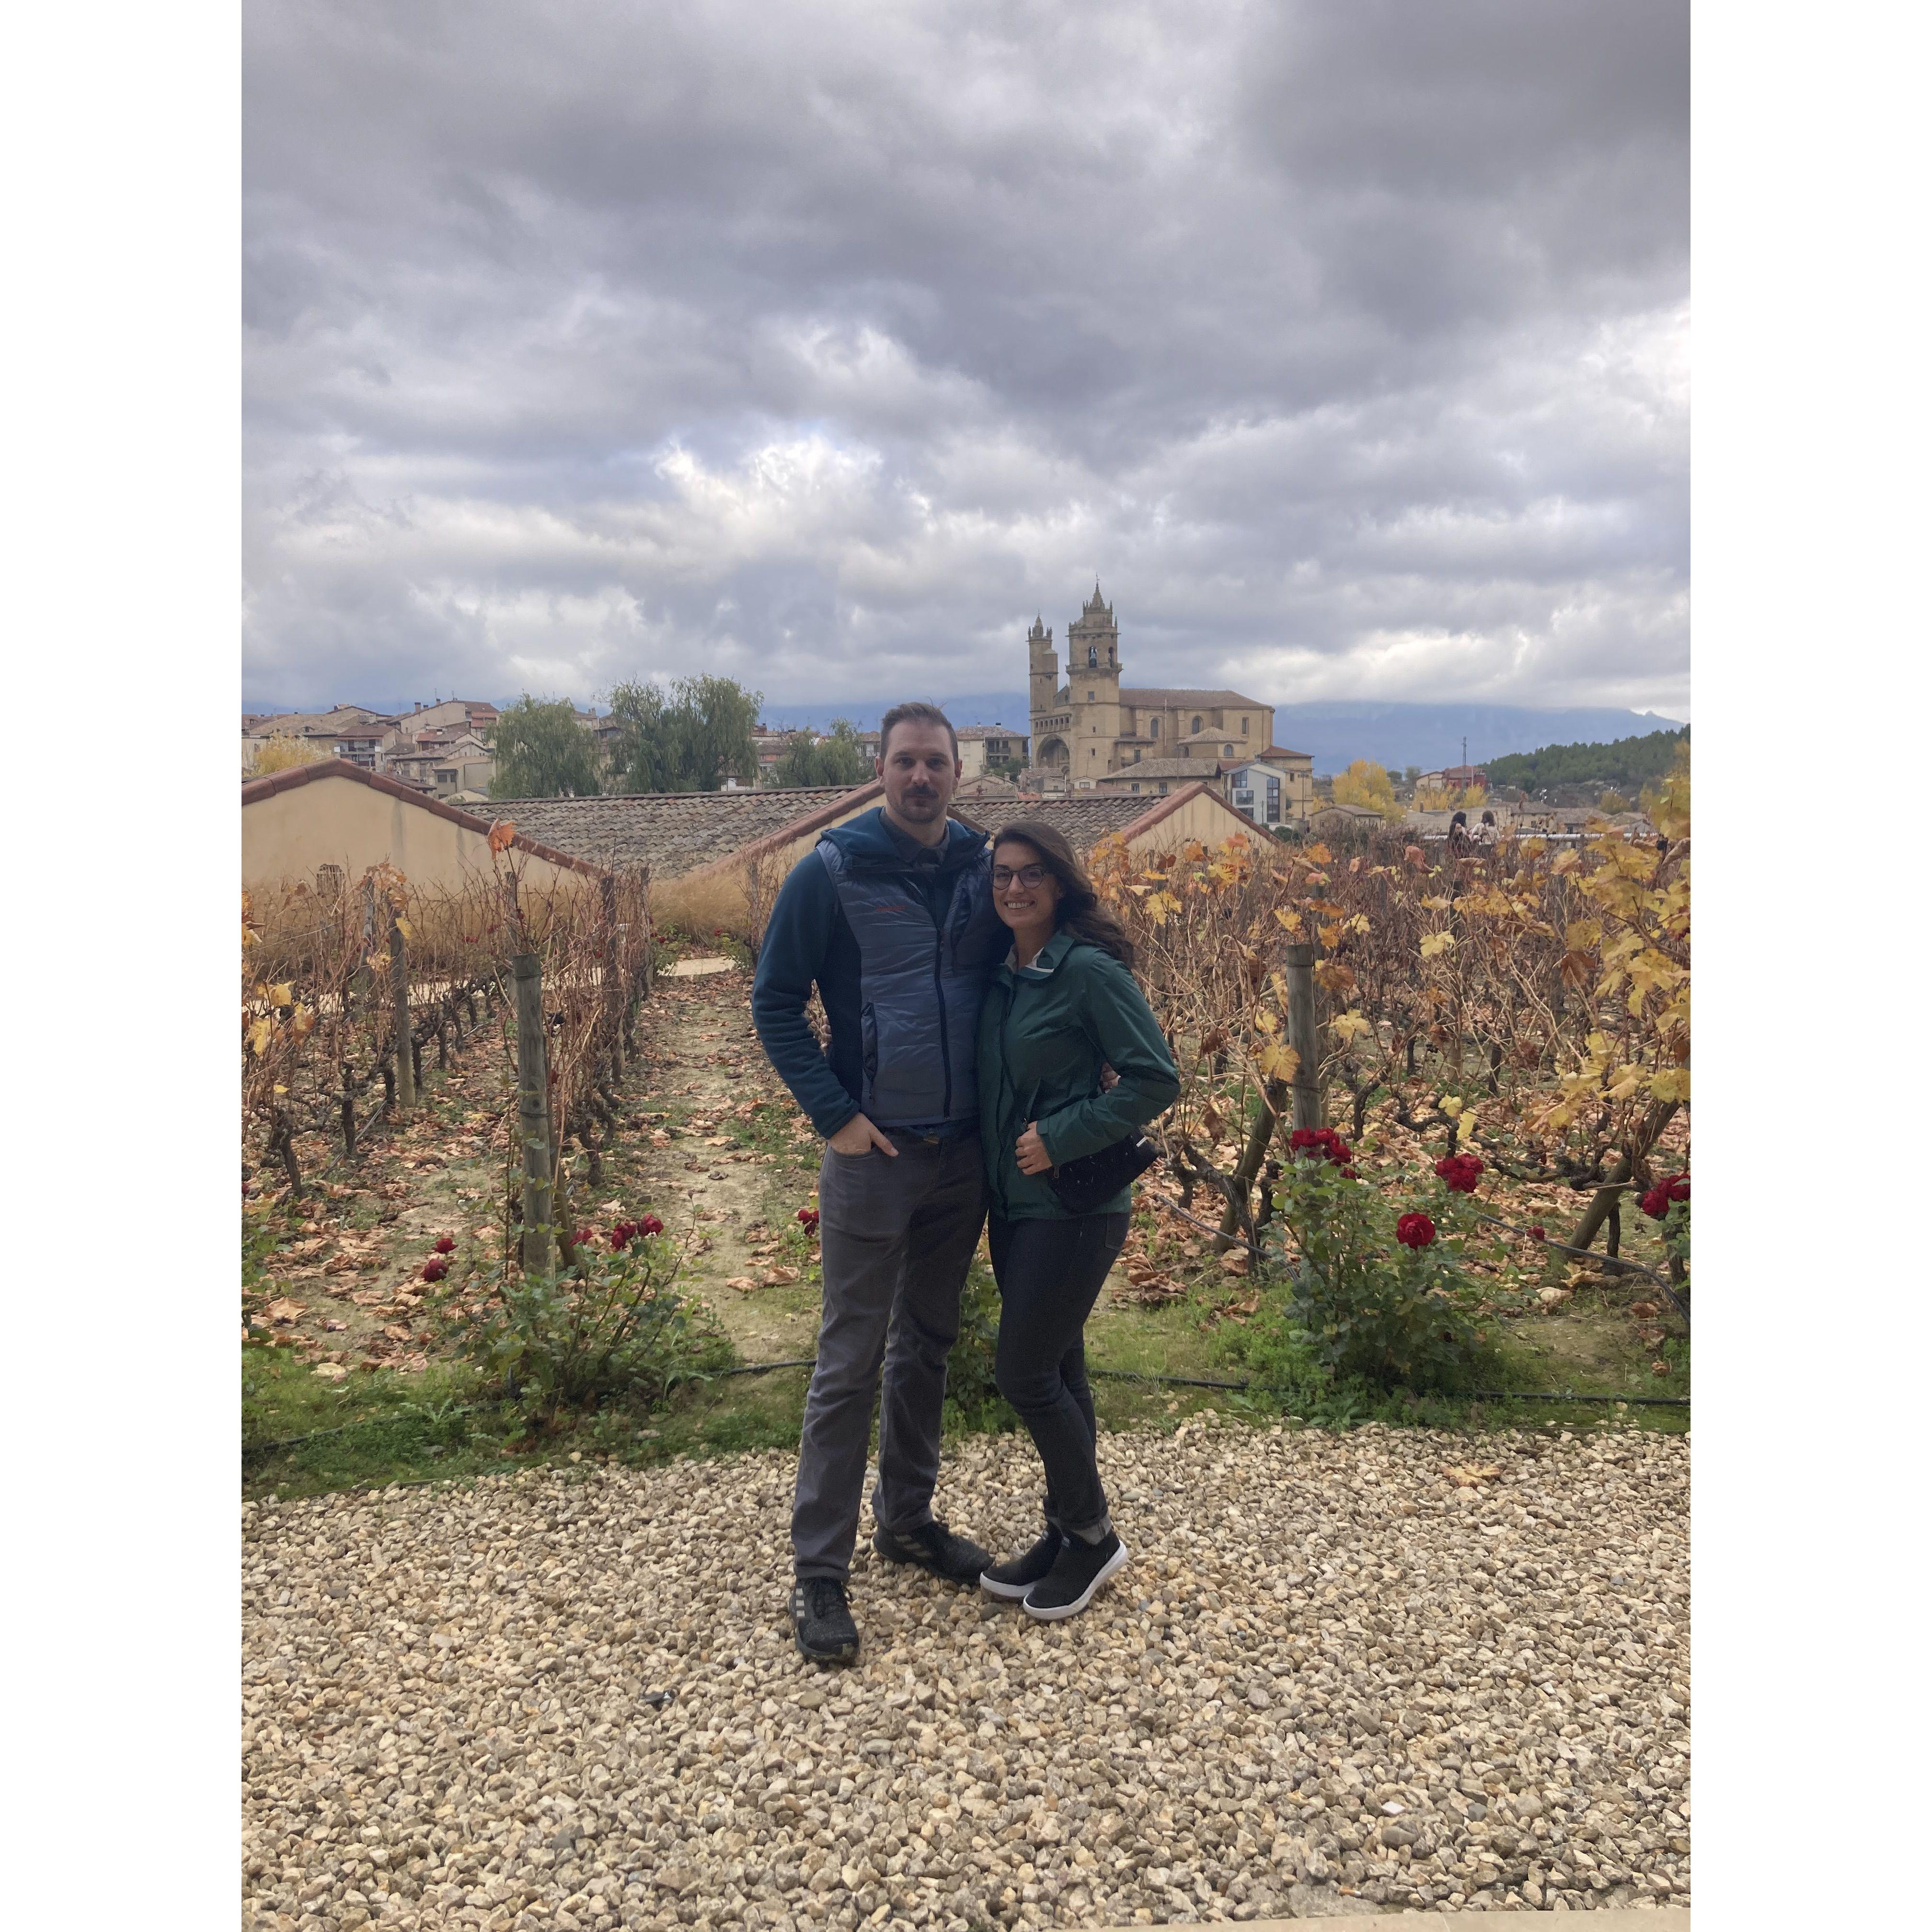 Our first international trip to Spain! We snuck into one of the largest and fanciest bodegas in La Rioja, the Marques de Riscal for this photo and some wine tasting...